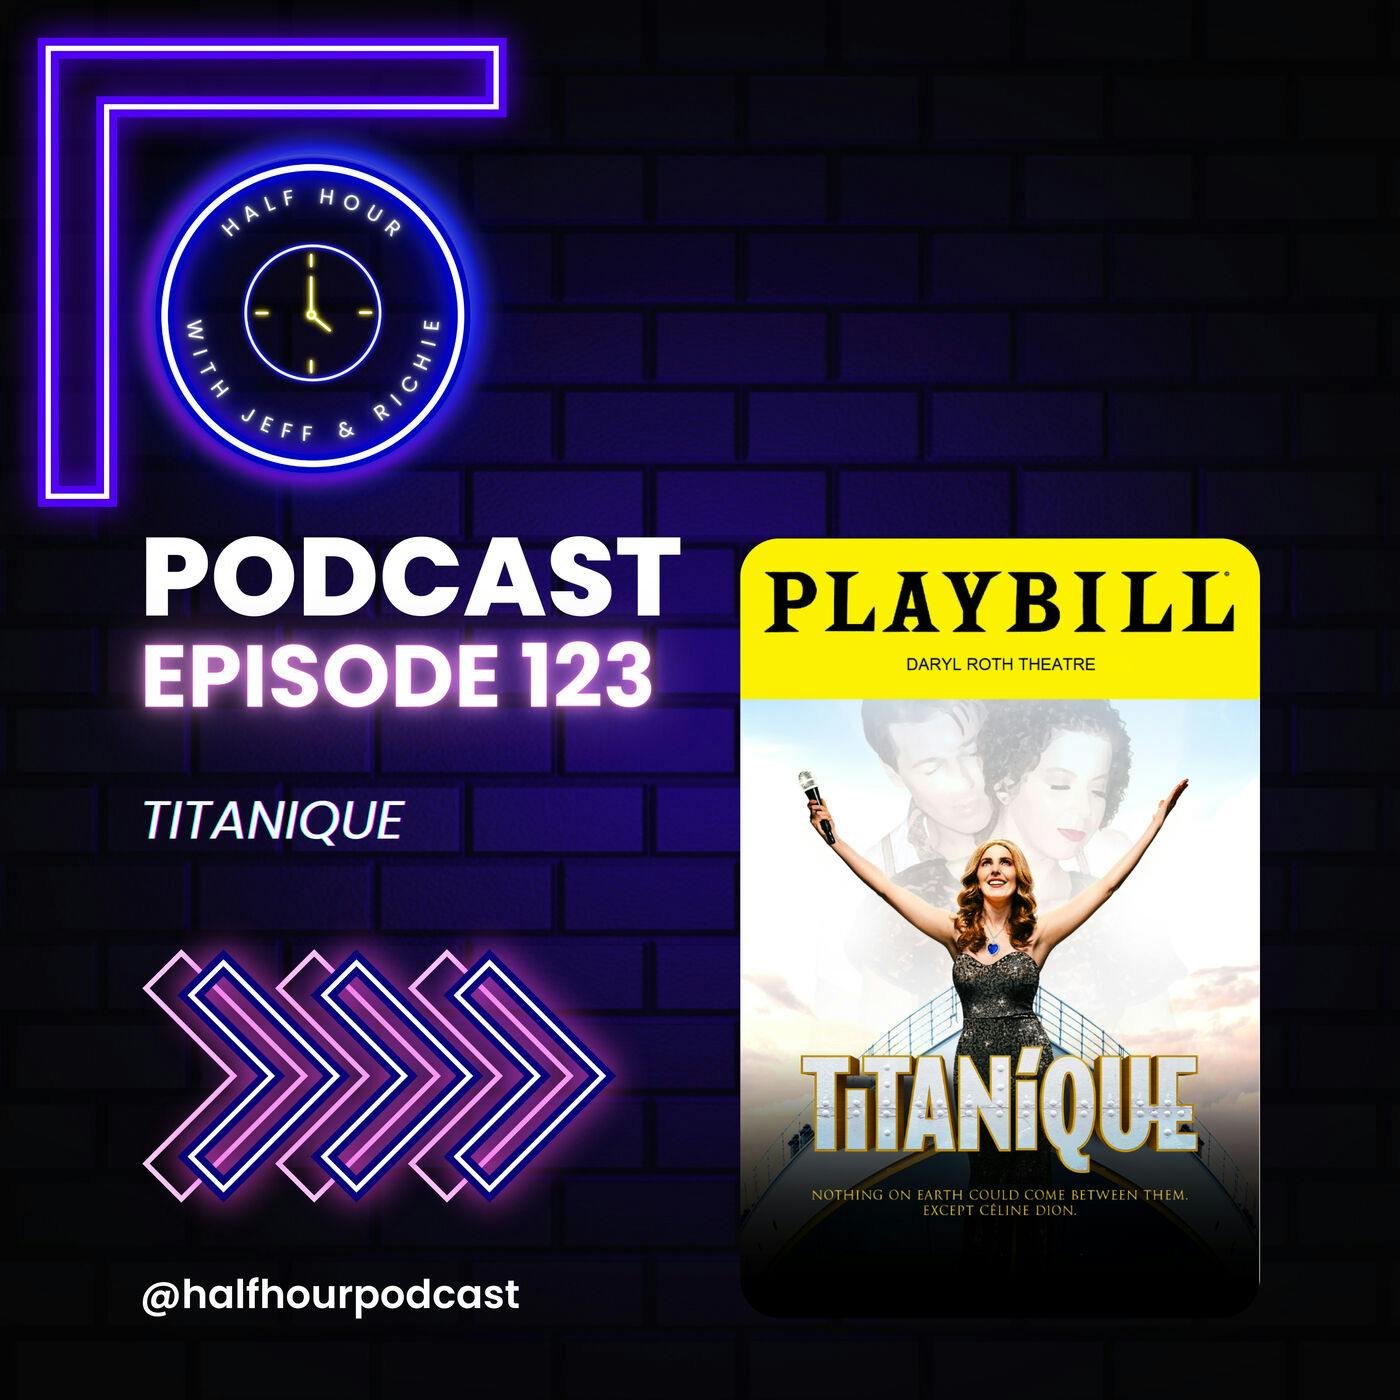 TITANIQUE - A Post-Show Broadway Analysis